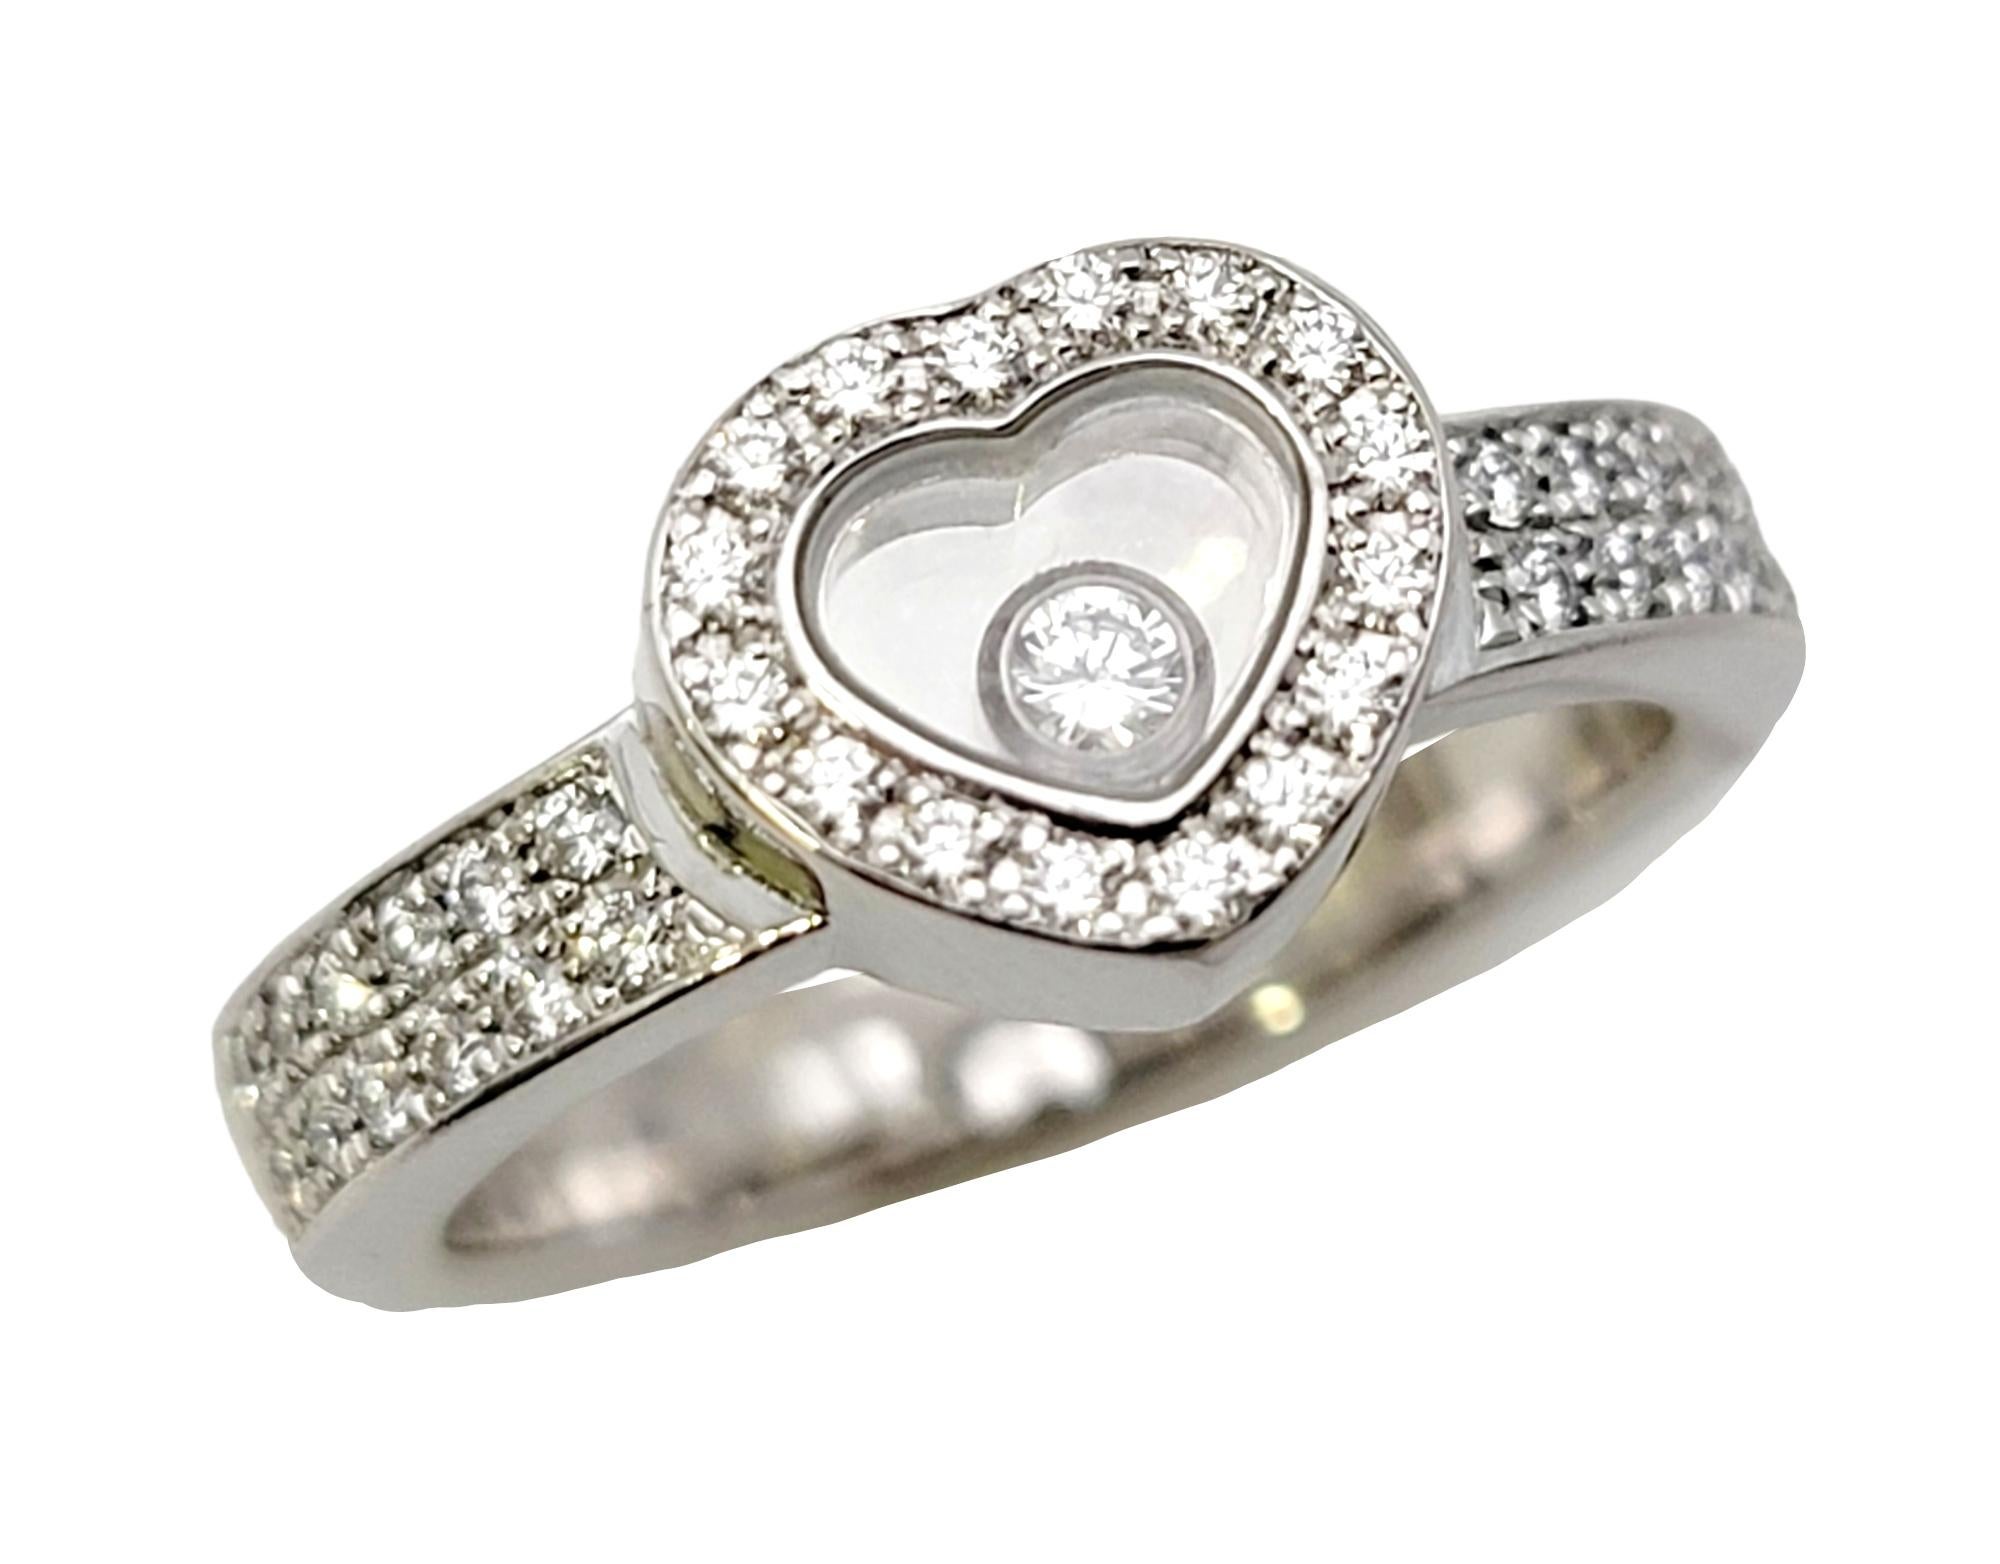 Ring size: 5.5

Dazzling diamond halo ring with a playful floating diamond detail by French designer, Chopard.  Part of the 'Happy Diamonds' collection, this unique heart ring offers sparkle and shine with a unique twist. You will absolutely love